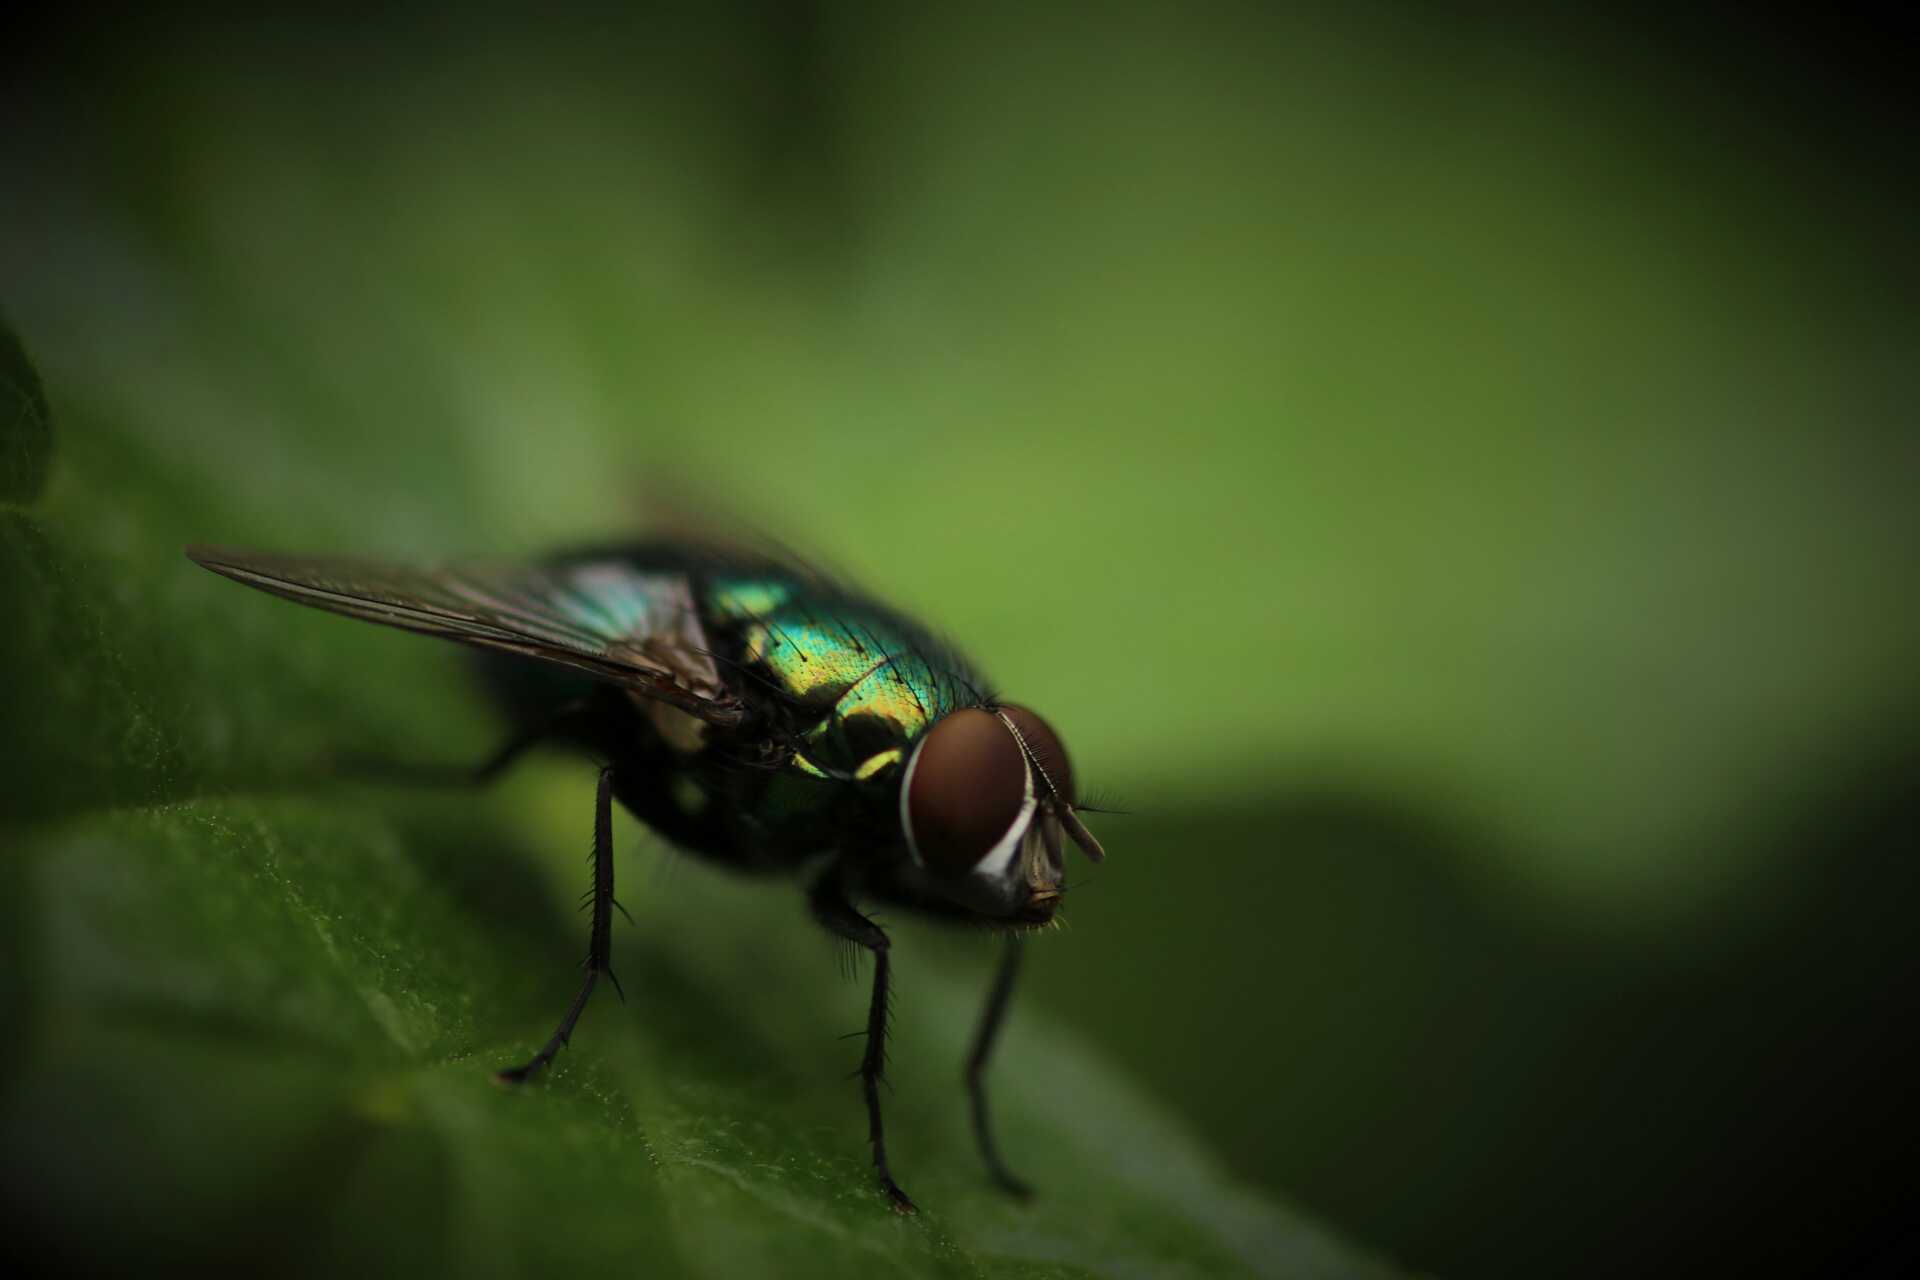 Close up photo of a fly on a leaf